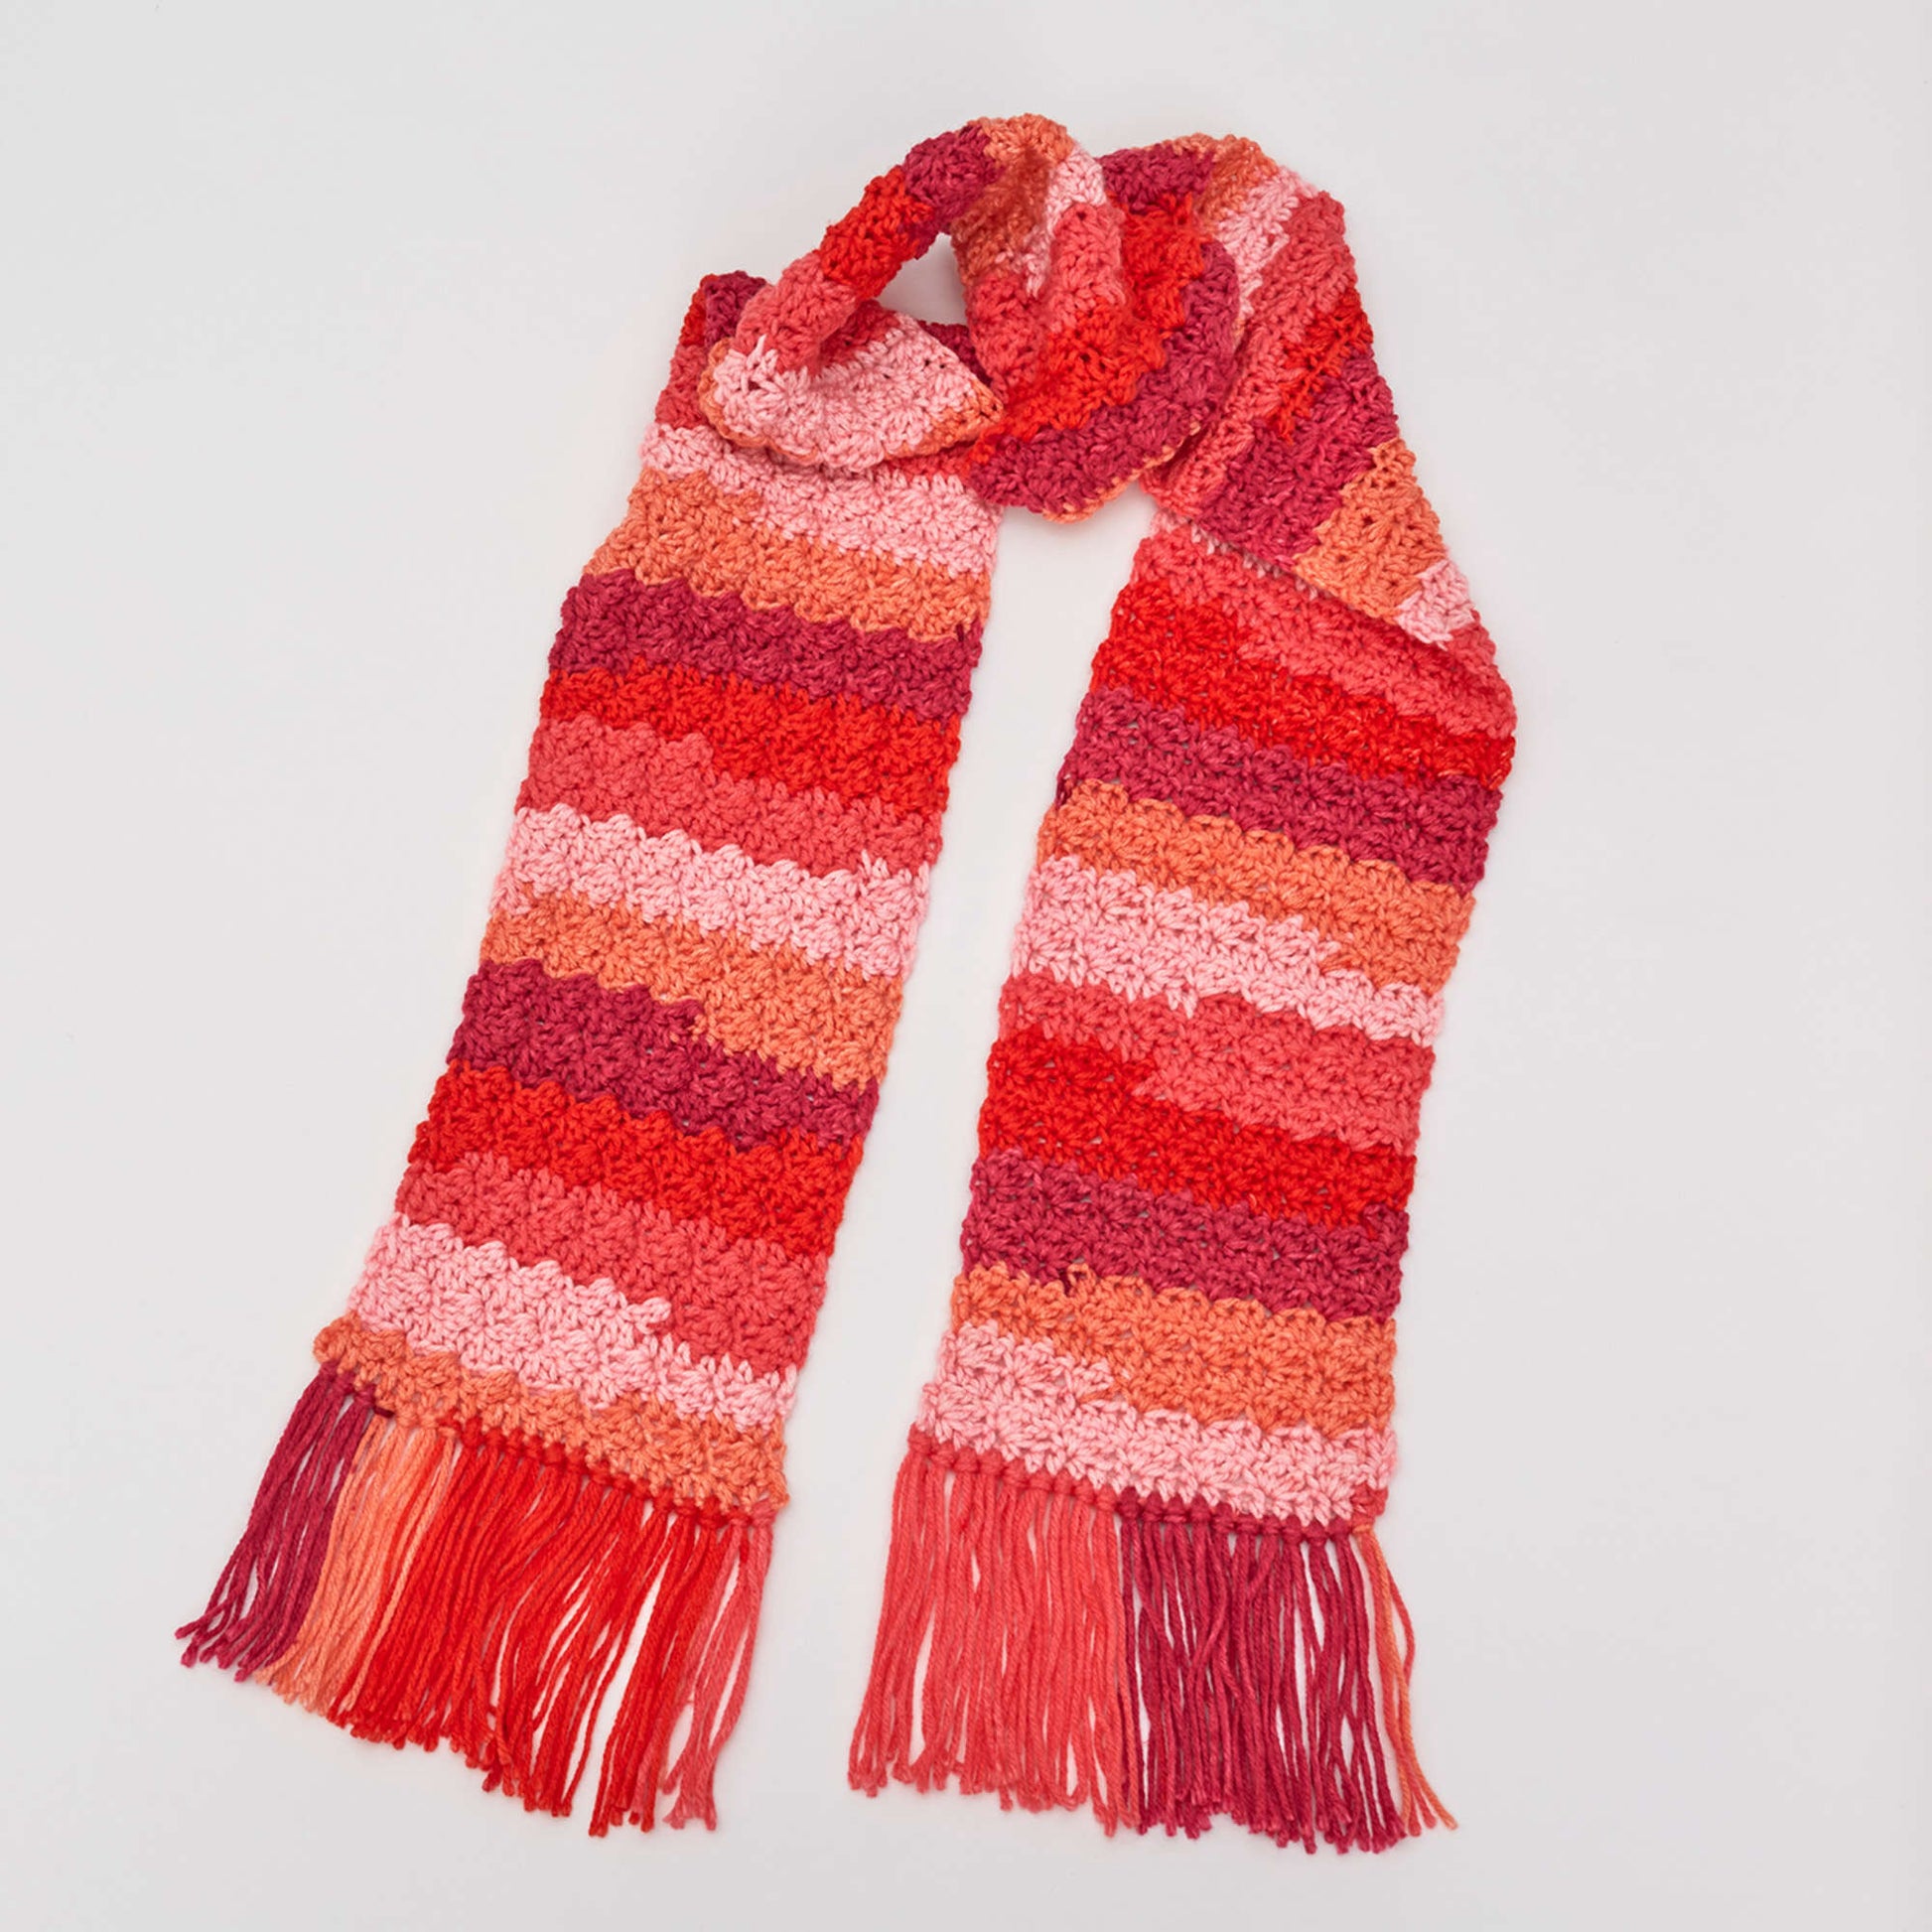 Free Red Heart Snazzy Striped Scarf Pattern